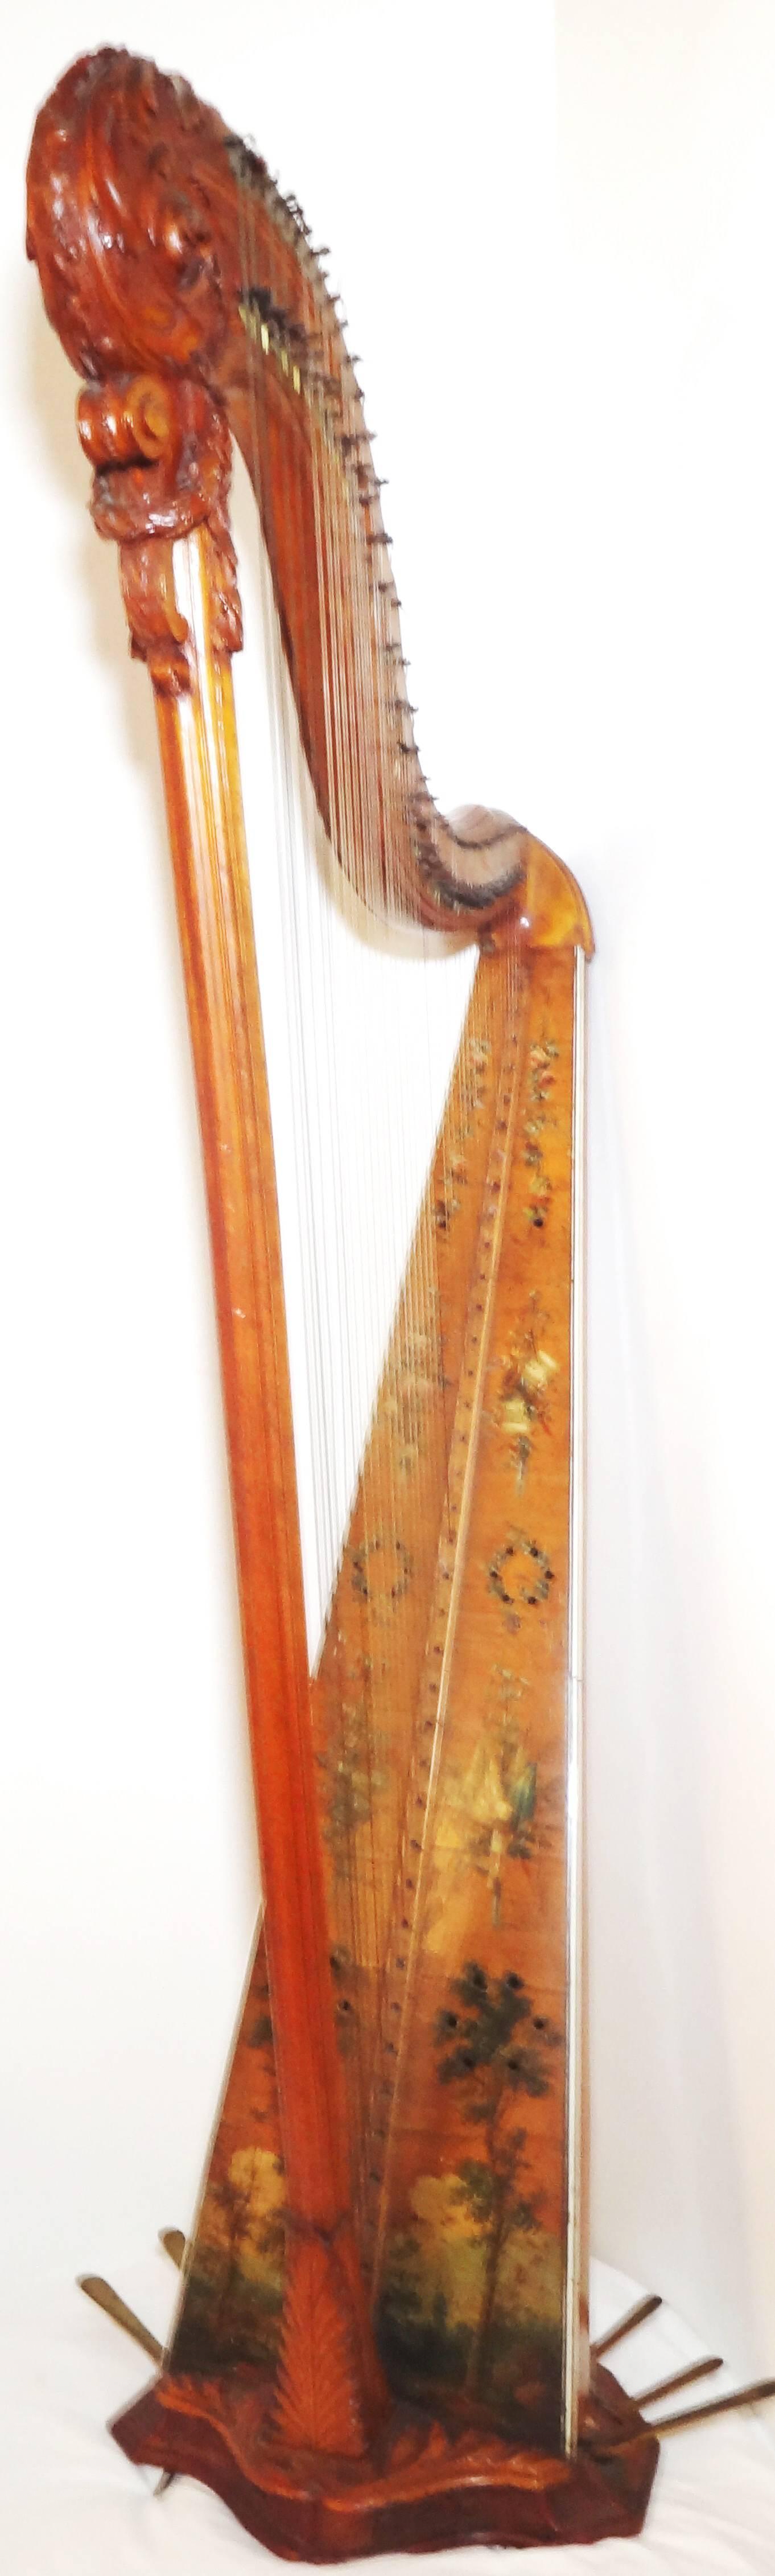 Original 18th century French harp signed by Renault and Chatelain, Louis XVI period 

On view at The Met Fifth Avenue, New York City and at the French Museum of Music in Paris, la Villette. 

This harp is more a curiosity object, a beautiful art